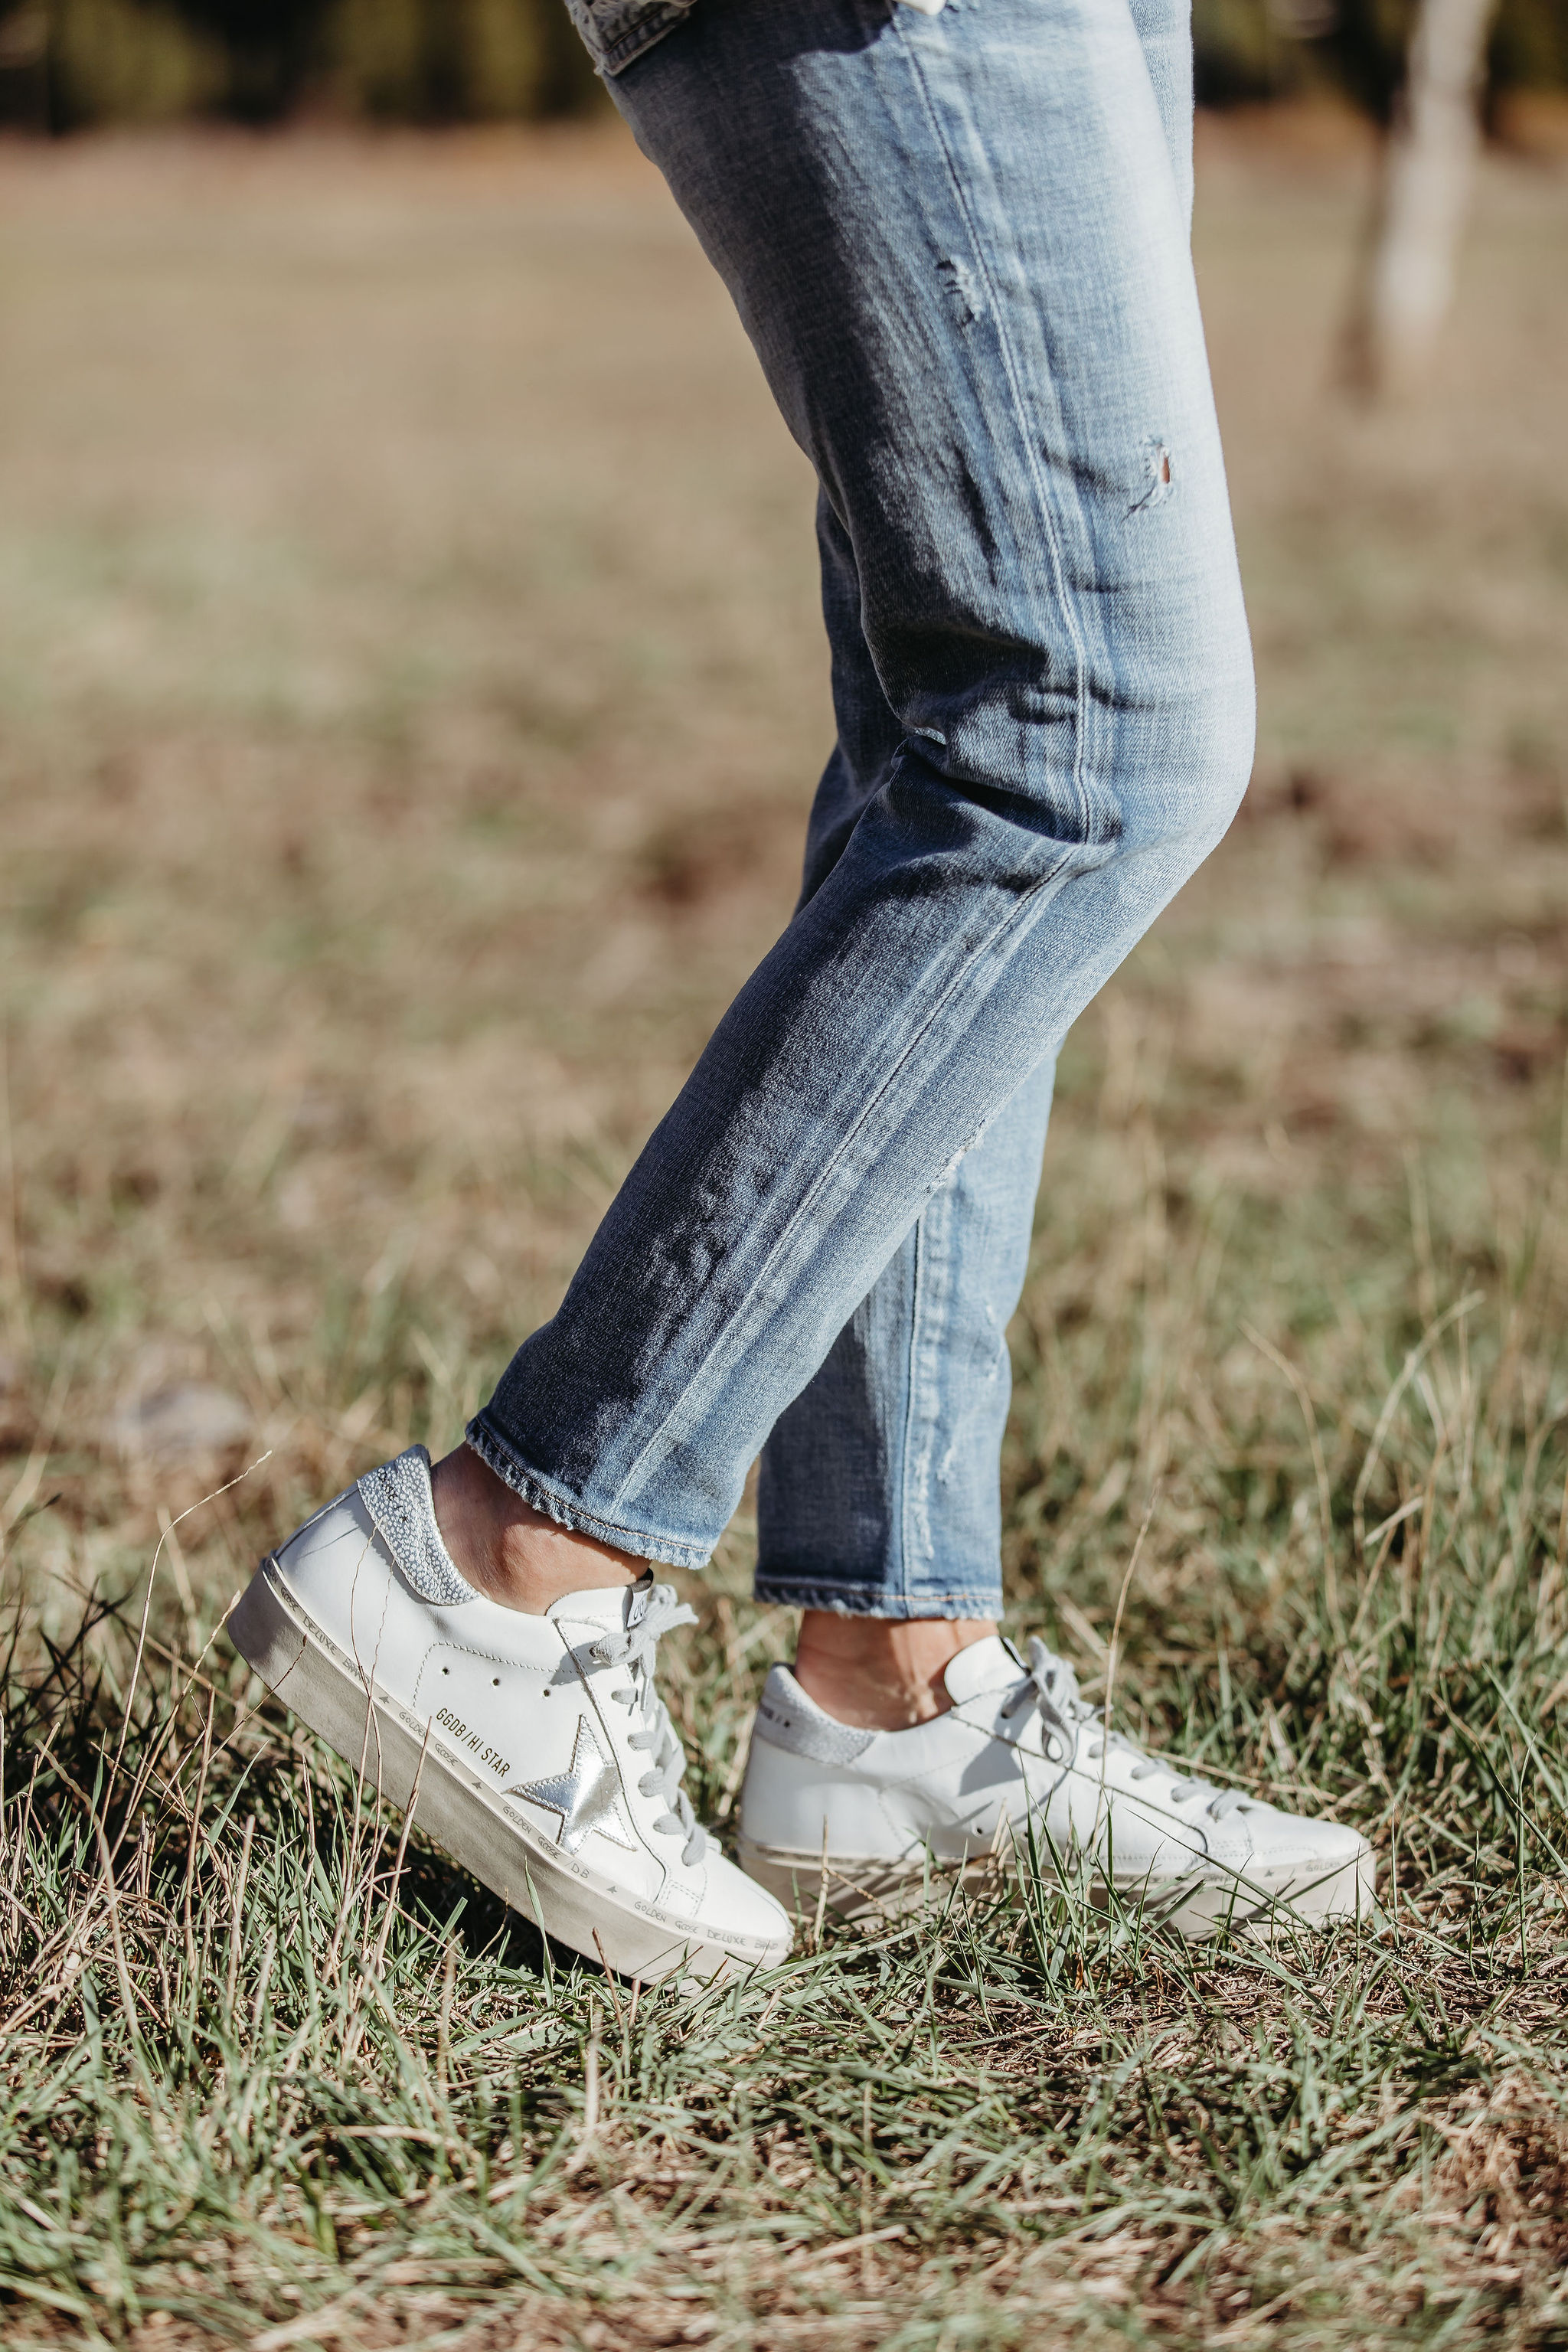 Button Downs For Summer, Fashion blogger Erin Busbee of BusbeeStyle.com wearing Moussy Vintage tapered jeans and Golden Goose platform sneakers from Nordstrom in Telluride, Colorado